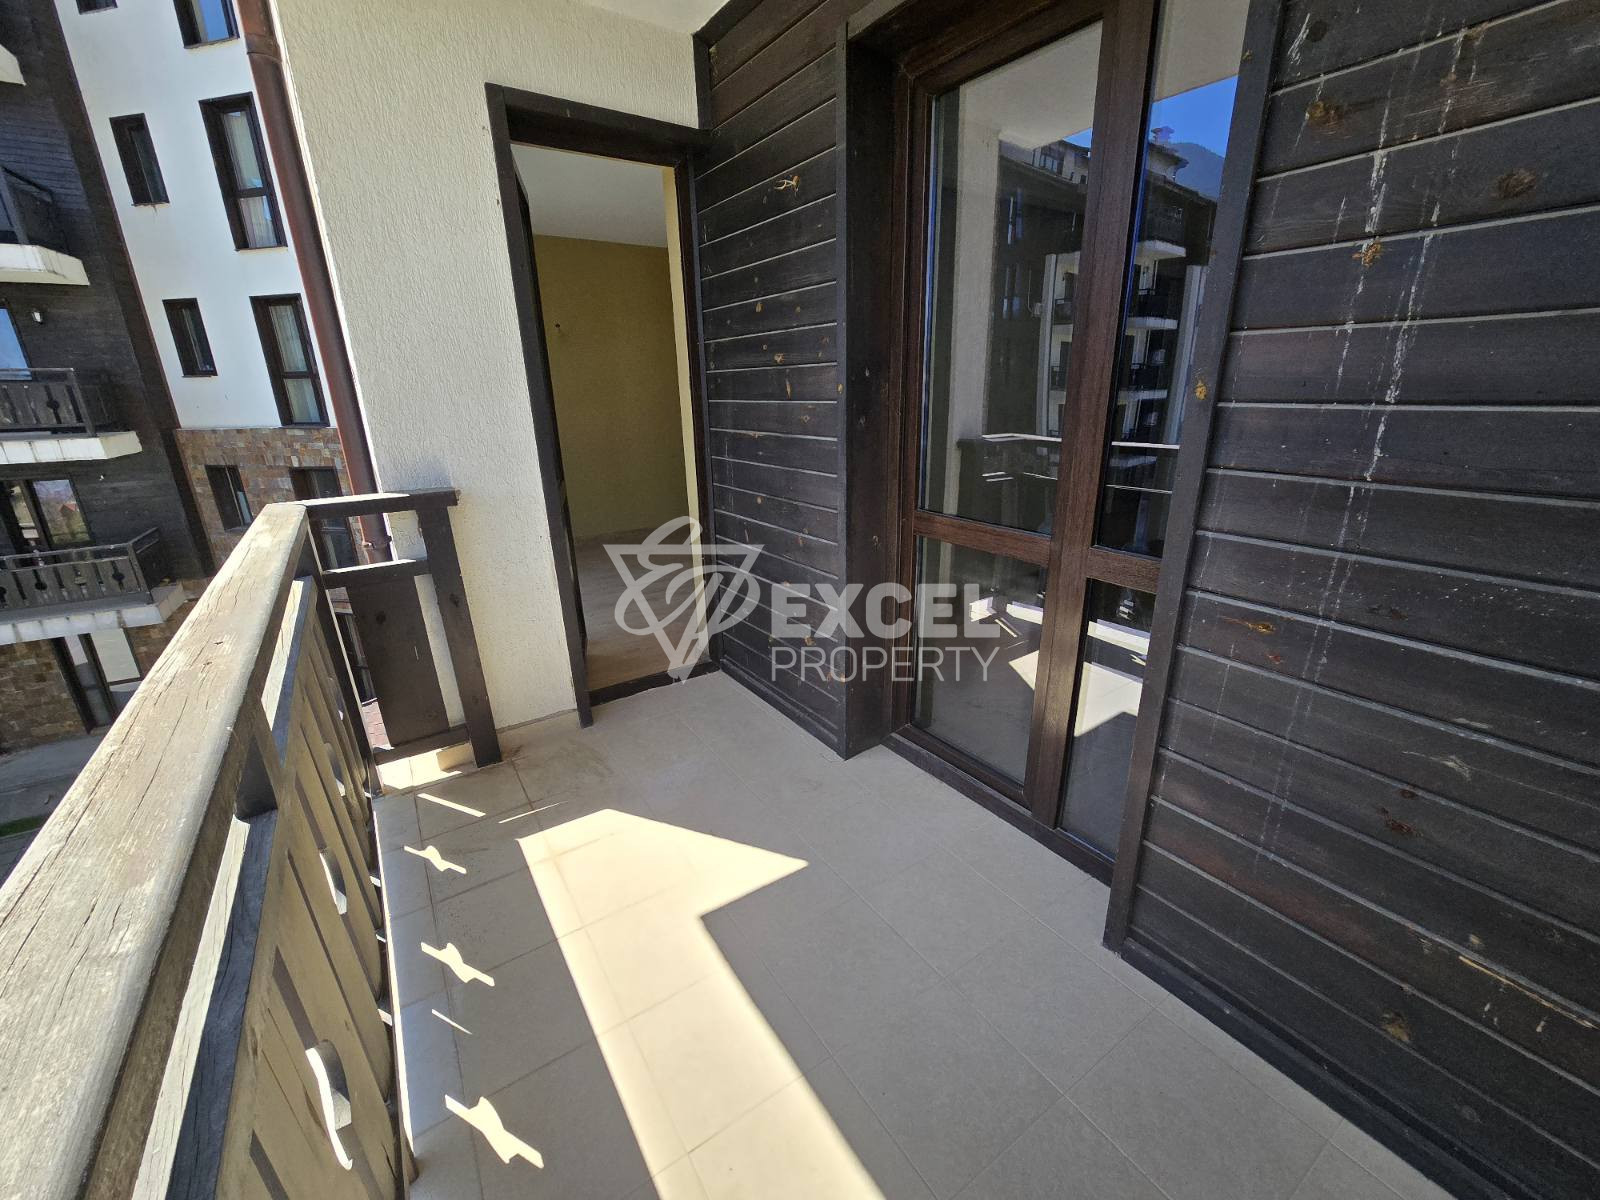 Sunny one-bedroom apartment in a building with a low maintenance fee, 400m from the Gondola